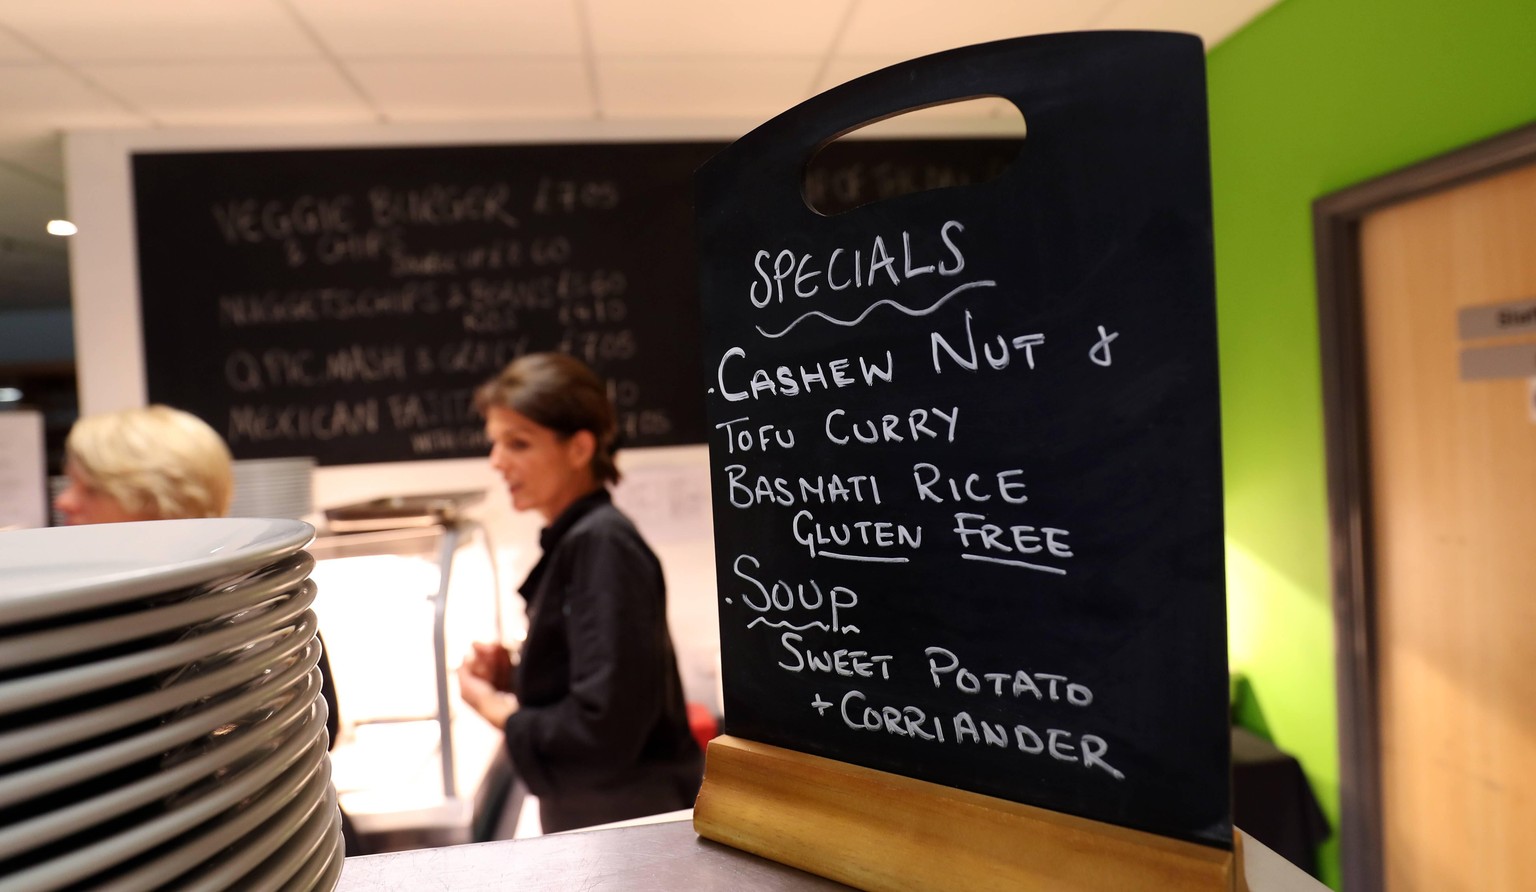 Forest Green Rovers v Lincoln City - Sky Bet League Two - The New Lawn Stadium A specials board adverting Vegan food inside the hospitality at The New Lawn Stadium, home to Forest Green Rovers EDITORI ...